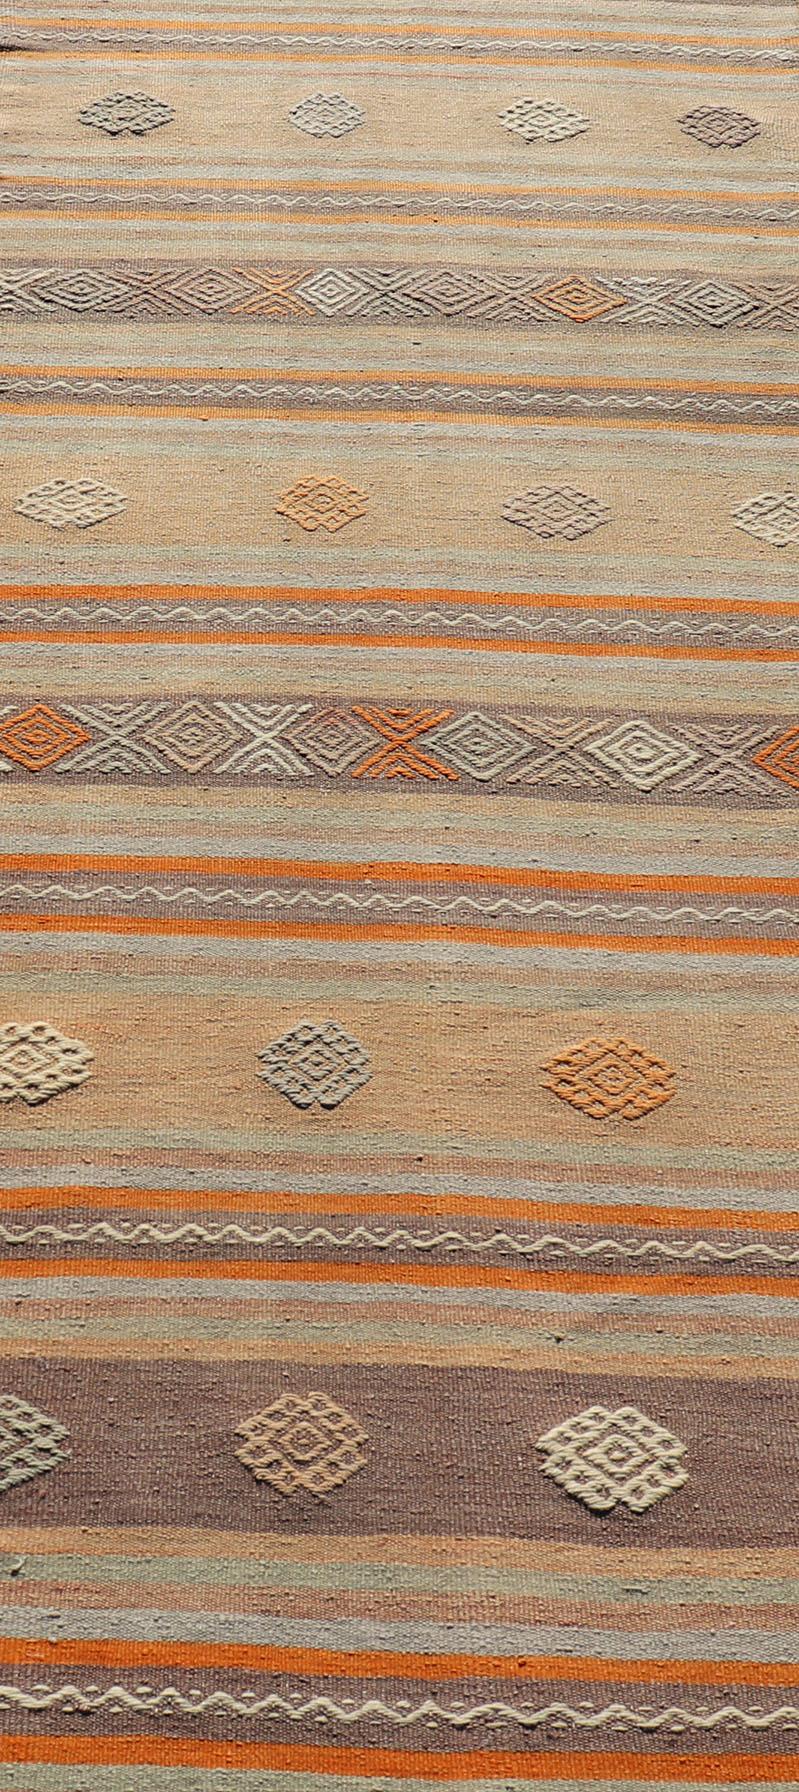 Wool Turkish Vintage Flat-Weave Kilim in Muted Colors with Stripes and Embroideries For Sale